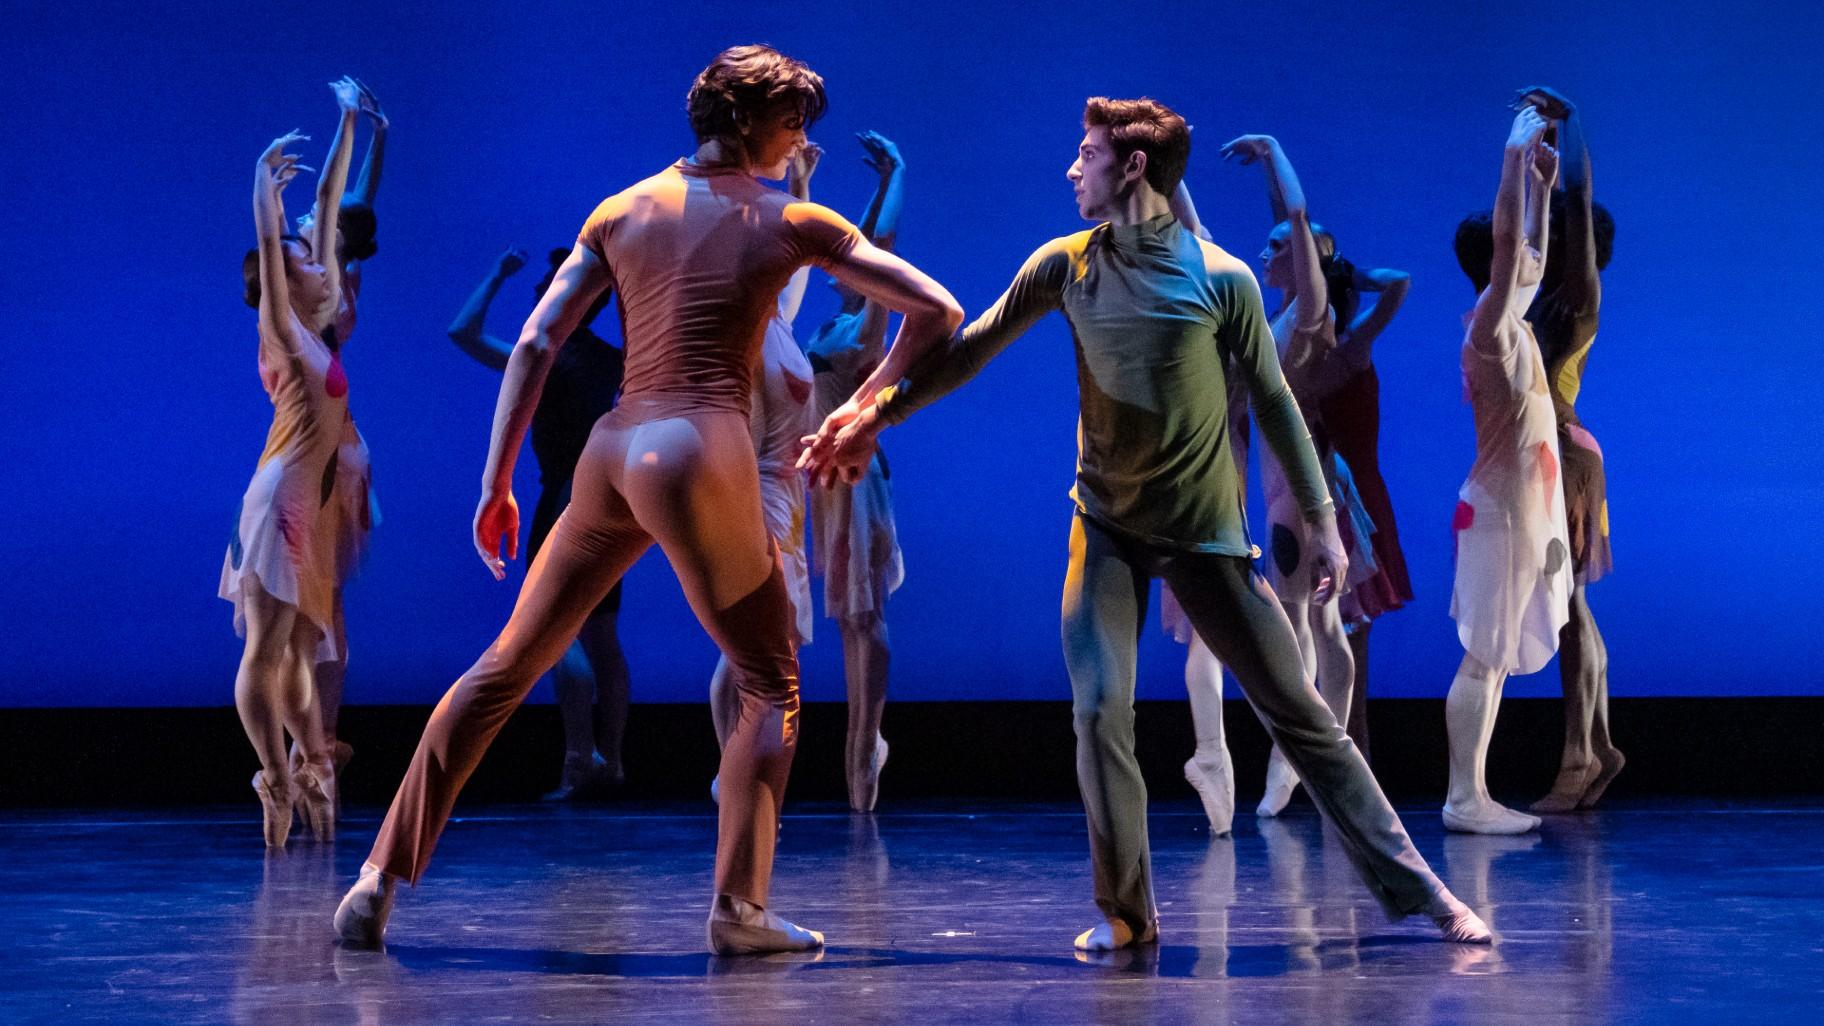 Joffrey Ballet’s “Winning Works” program featured four world premiere pieces created for members of the Joffrey Studio Company and Joffrey Academy. (Credit Todd Rosenberg)